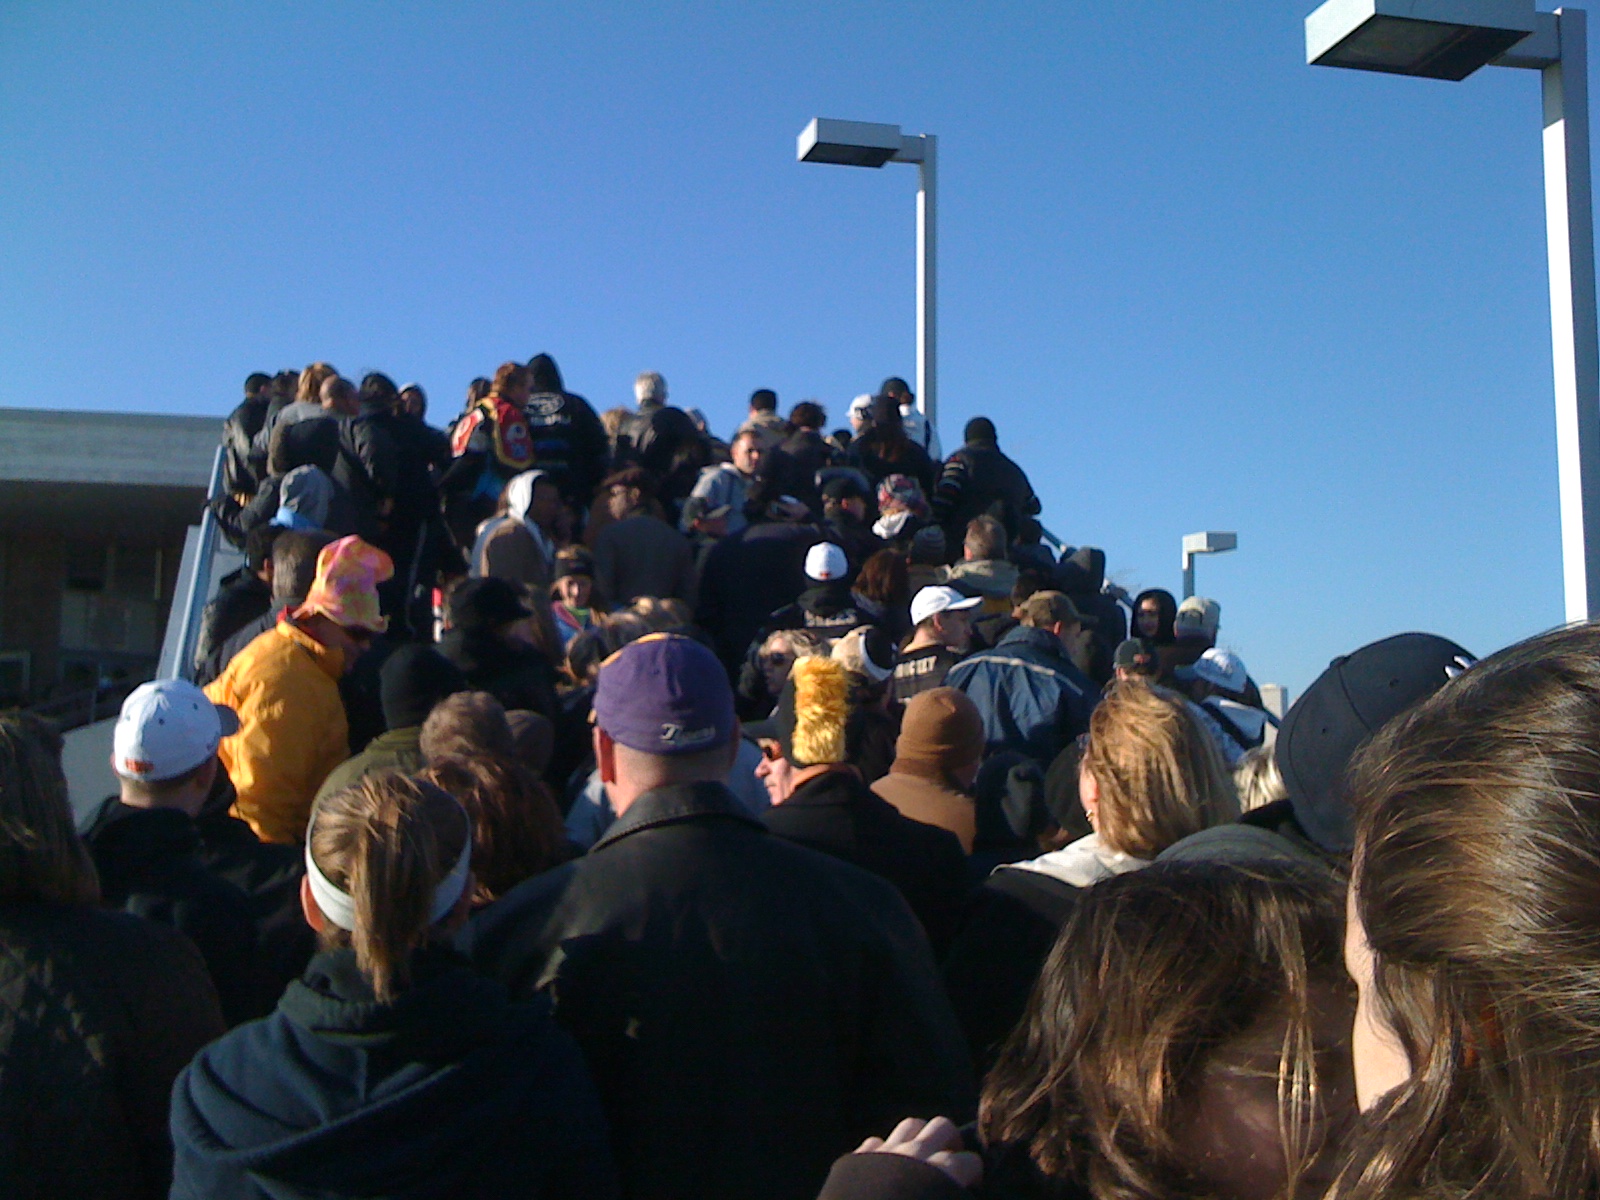 Waiting for the ferry and the New Orleans Super Bowl Parade